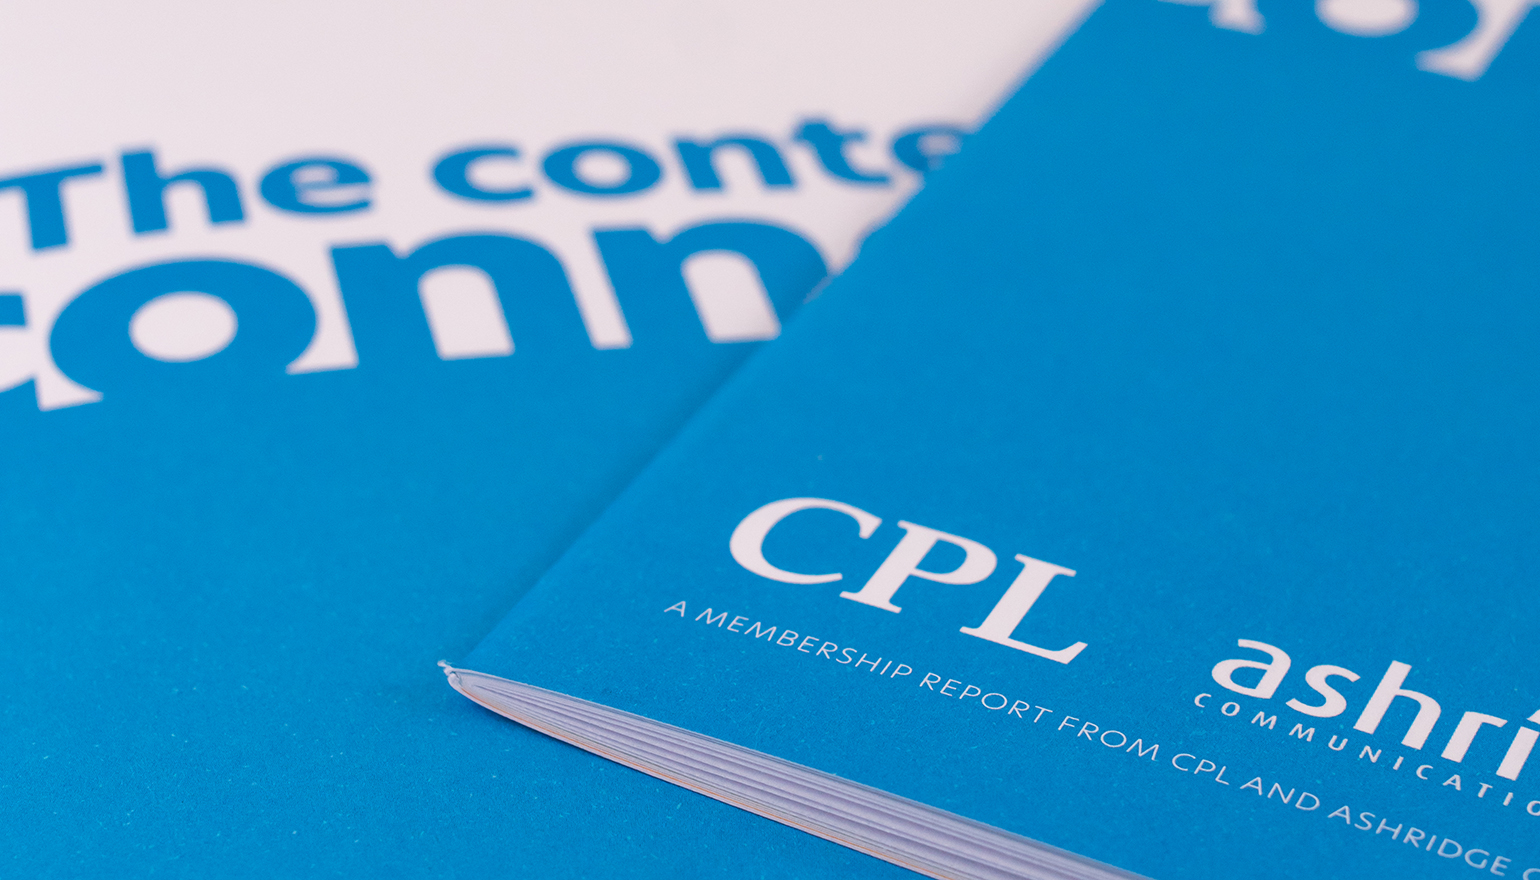 The Content Connection - a research report from CPL and Ashridge Communications